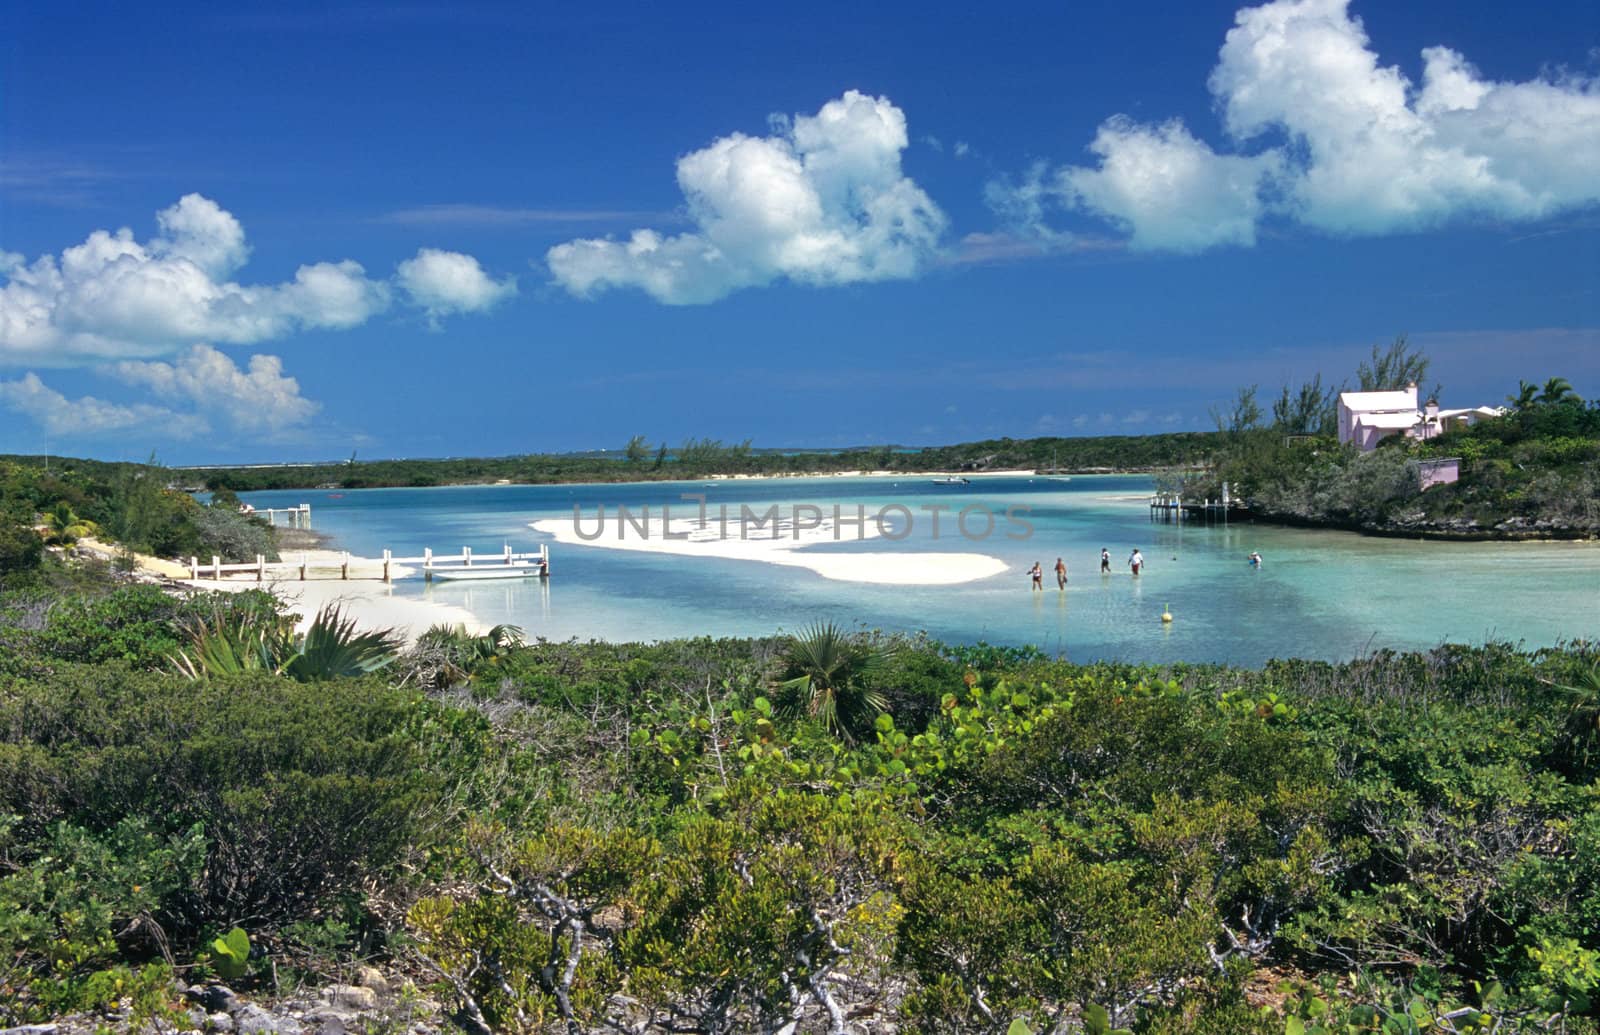 Five people wade through the tourquoise waters of an island in the Bahamas.